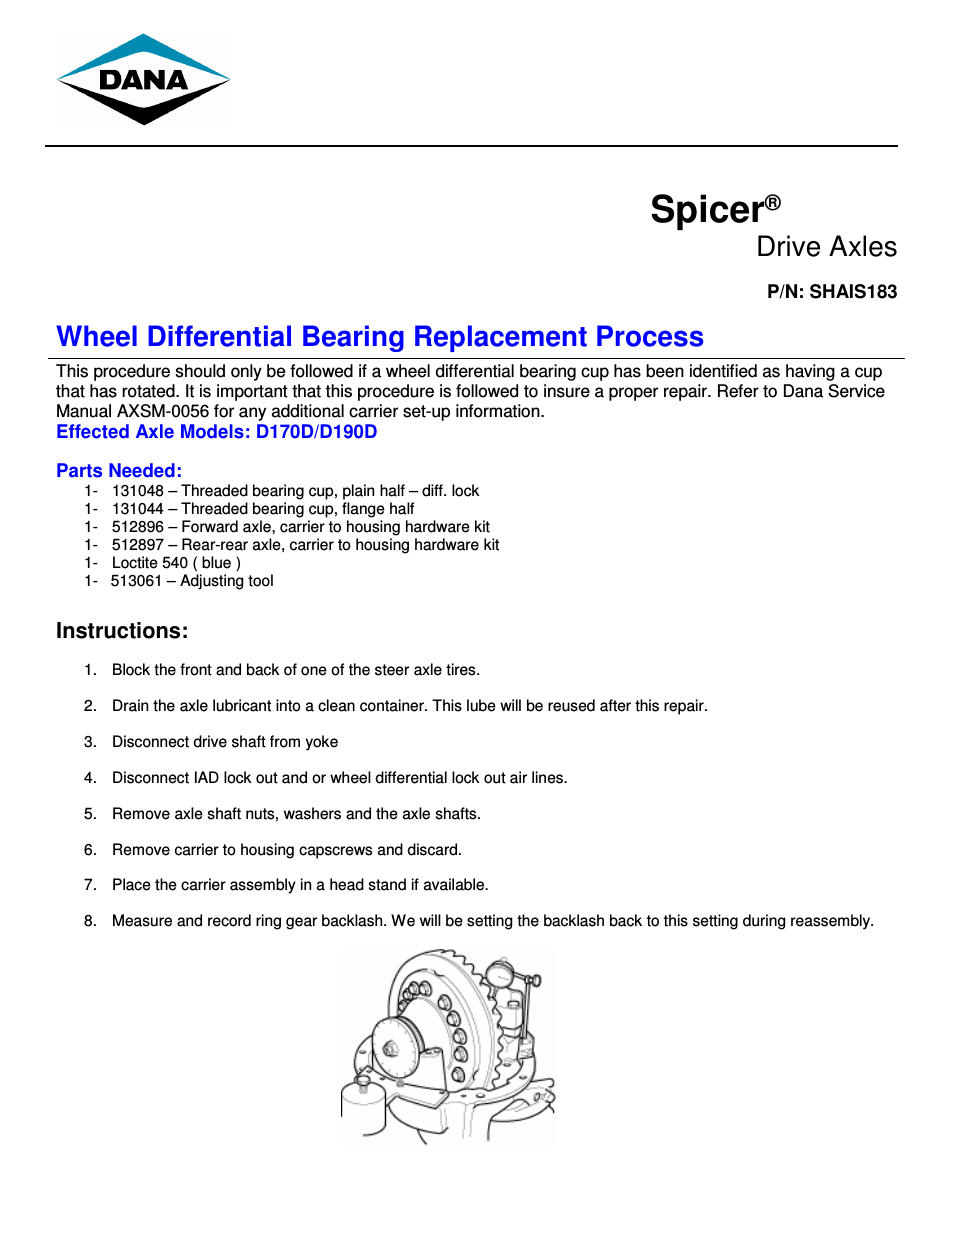 Wheel Differential Bearing Replacement Process